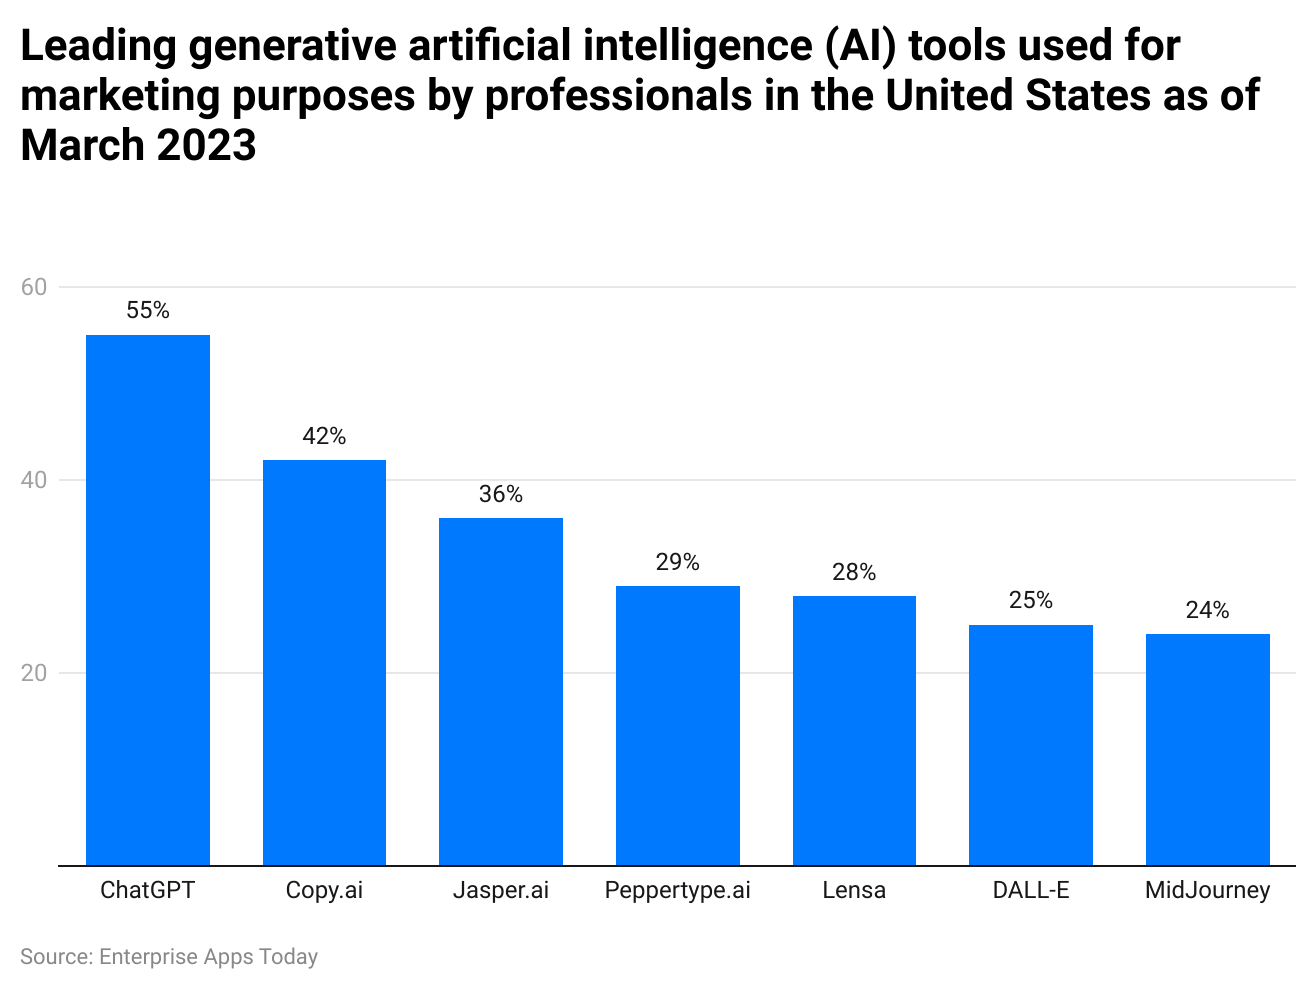 leading-generative-artificial-intelligence-ai-tools-used-for-marketing-purposes-by-professionals-in-the-united-states-as-of-march-2023.